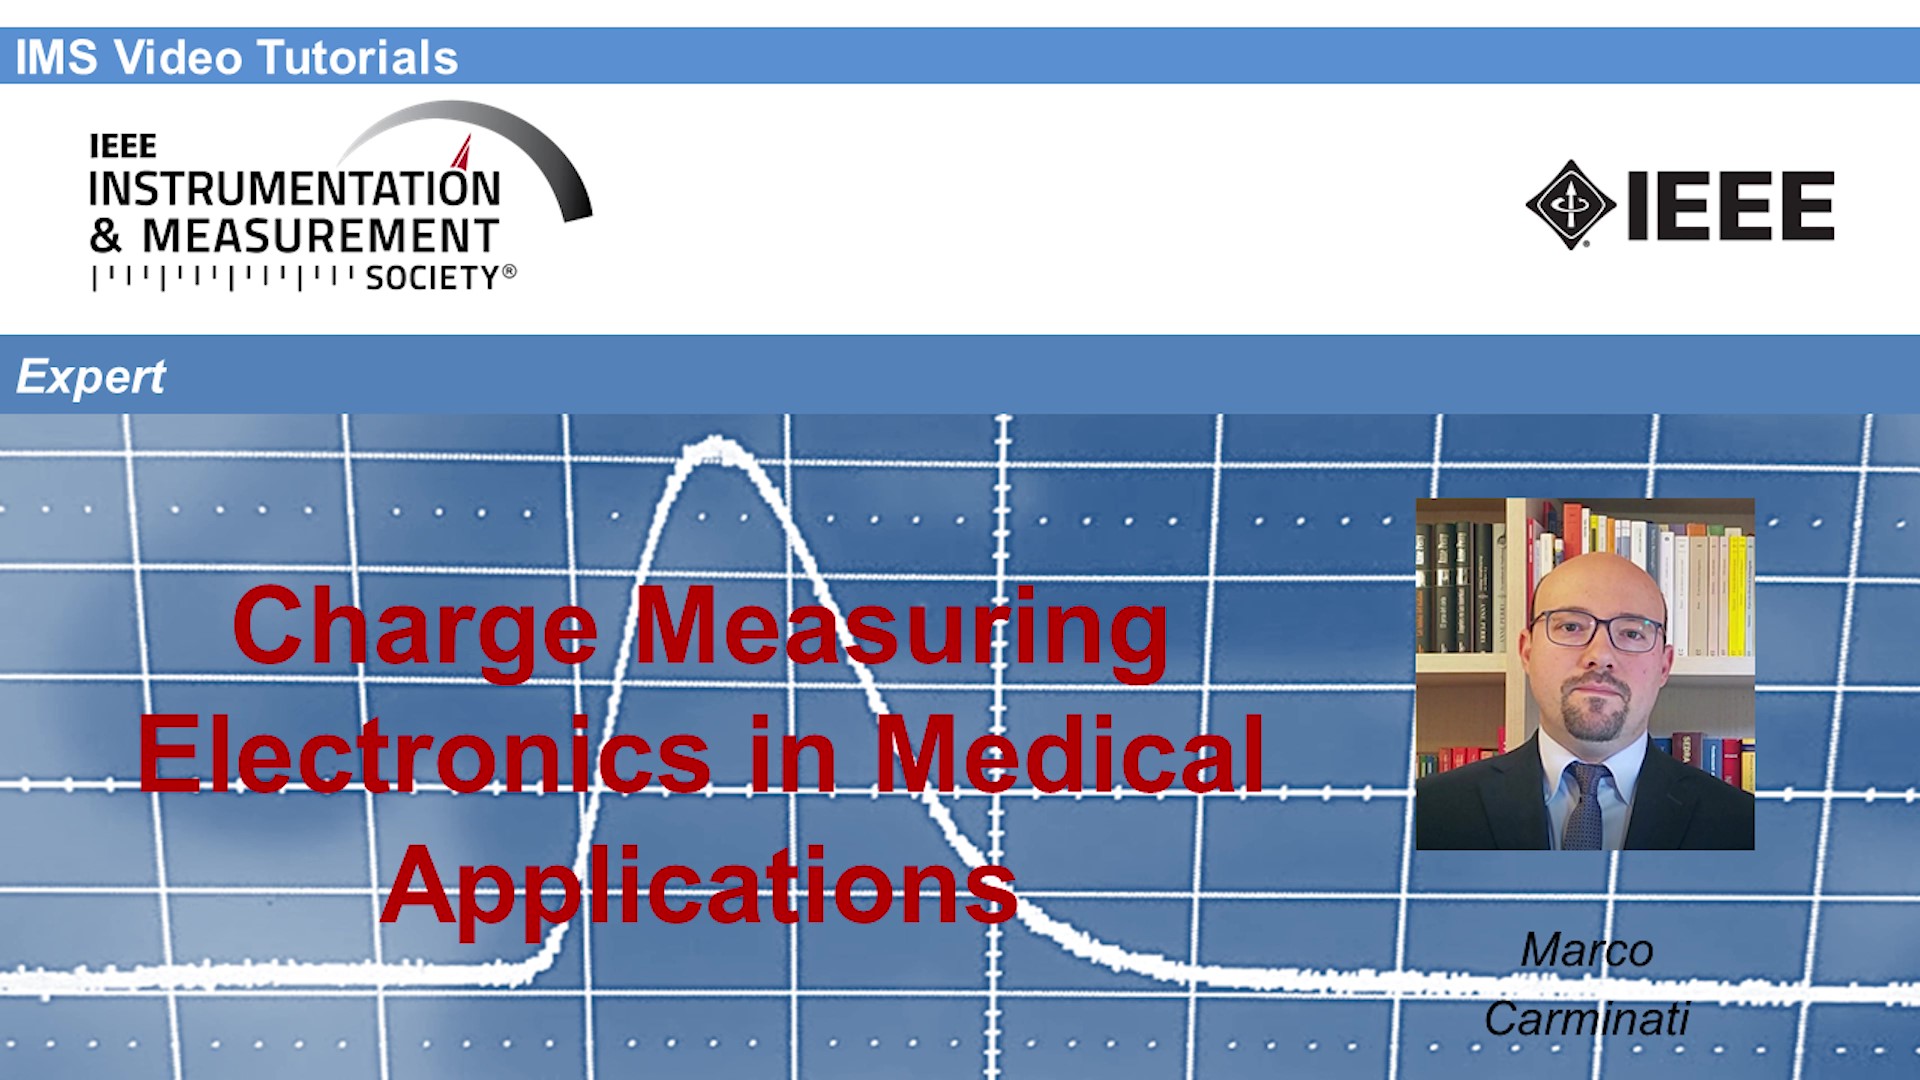 Charge Measuring Electronics in Medical Applications